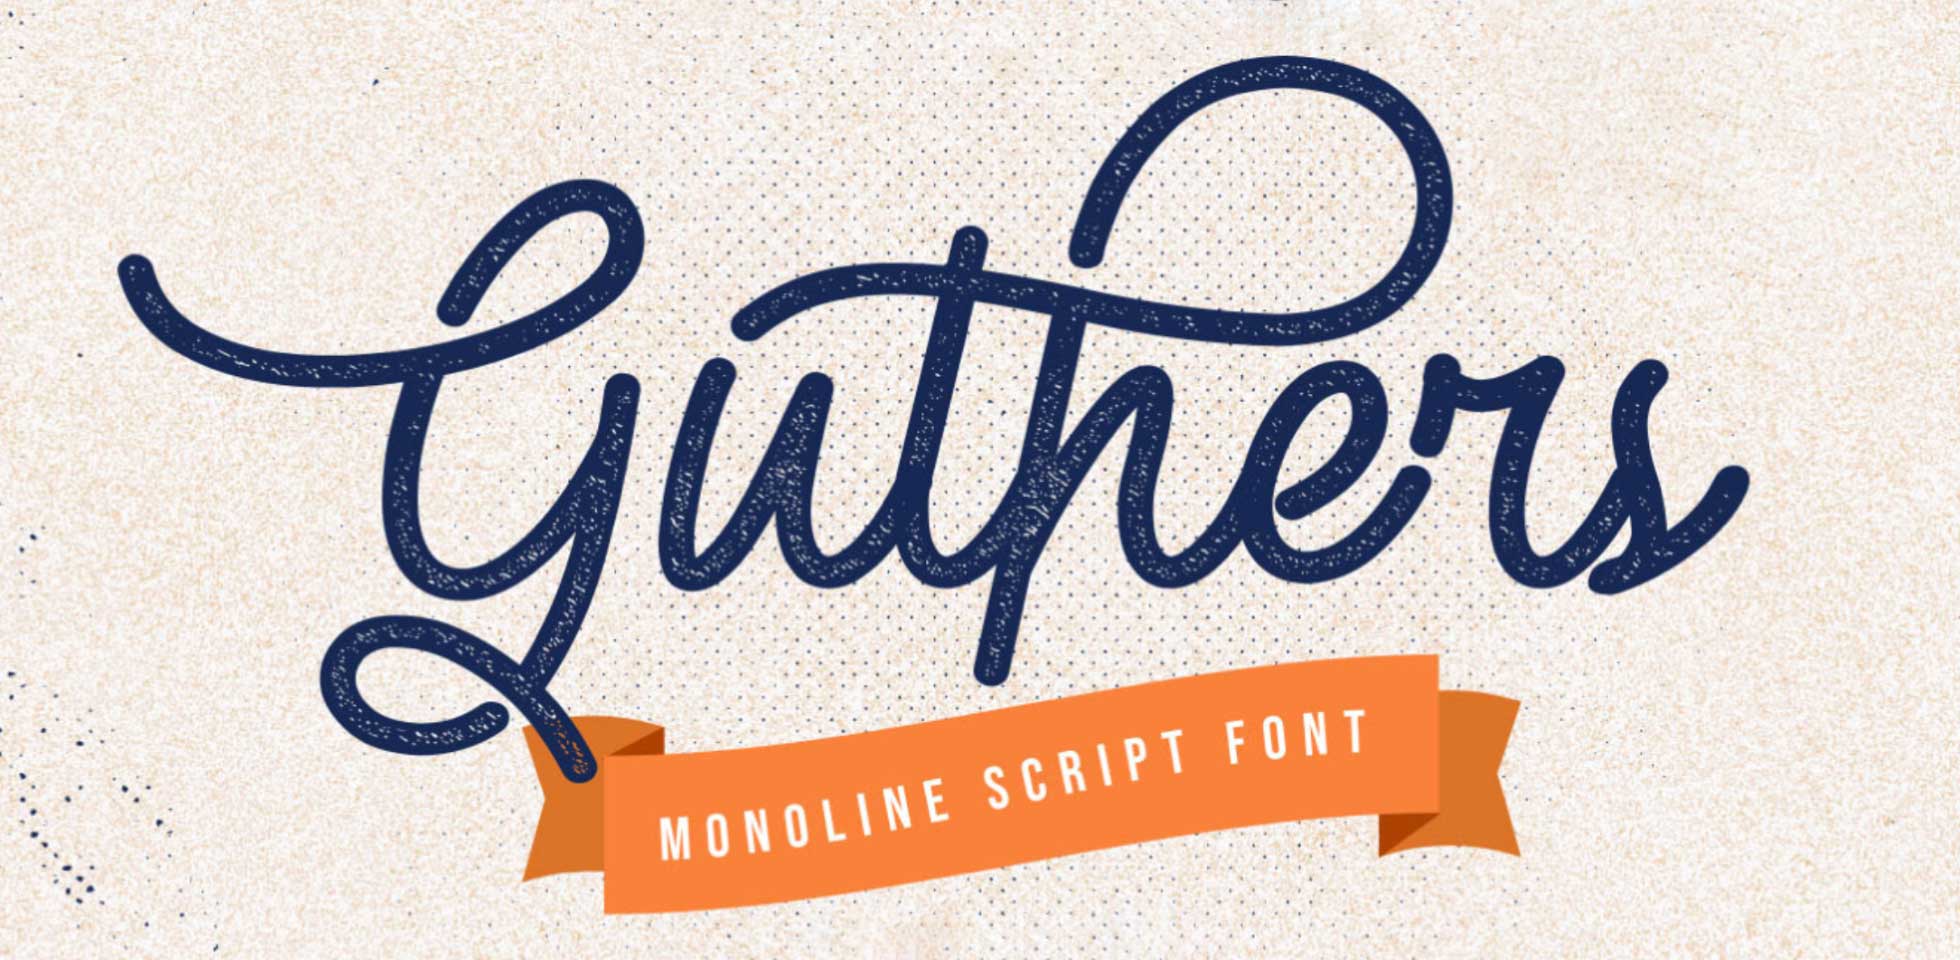 Free Download: Guthers Font